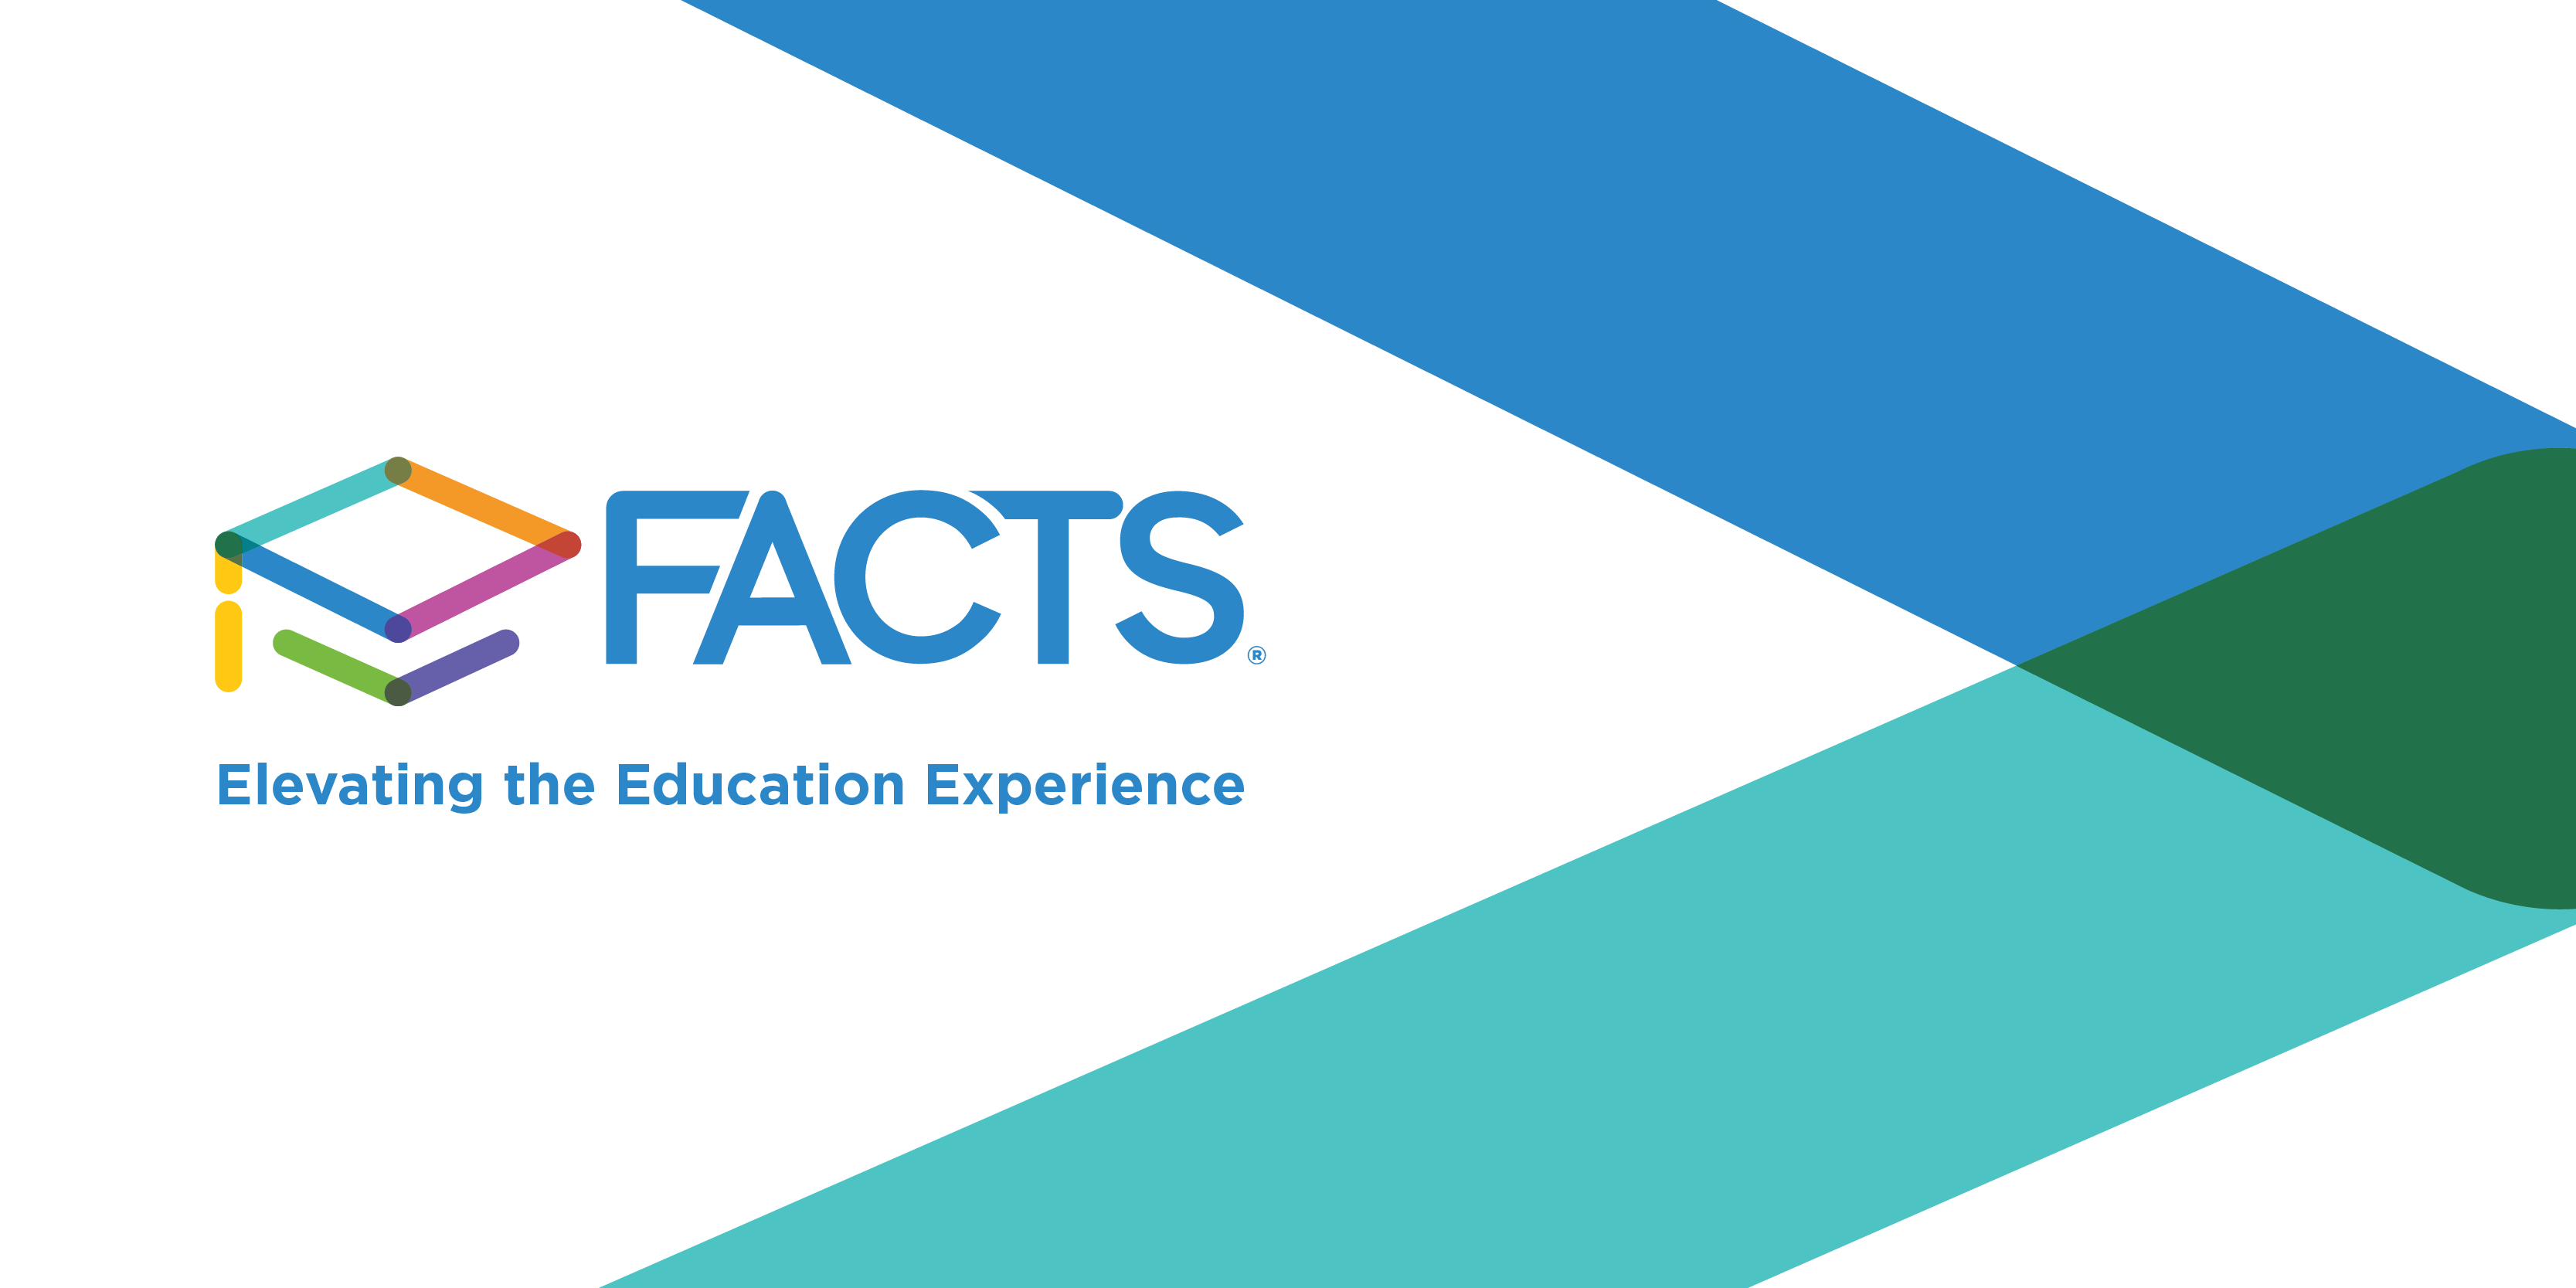 FACTS logo with tagline